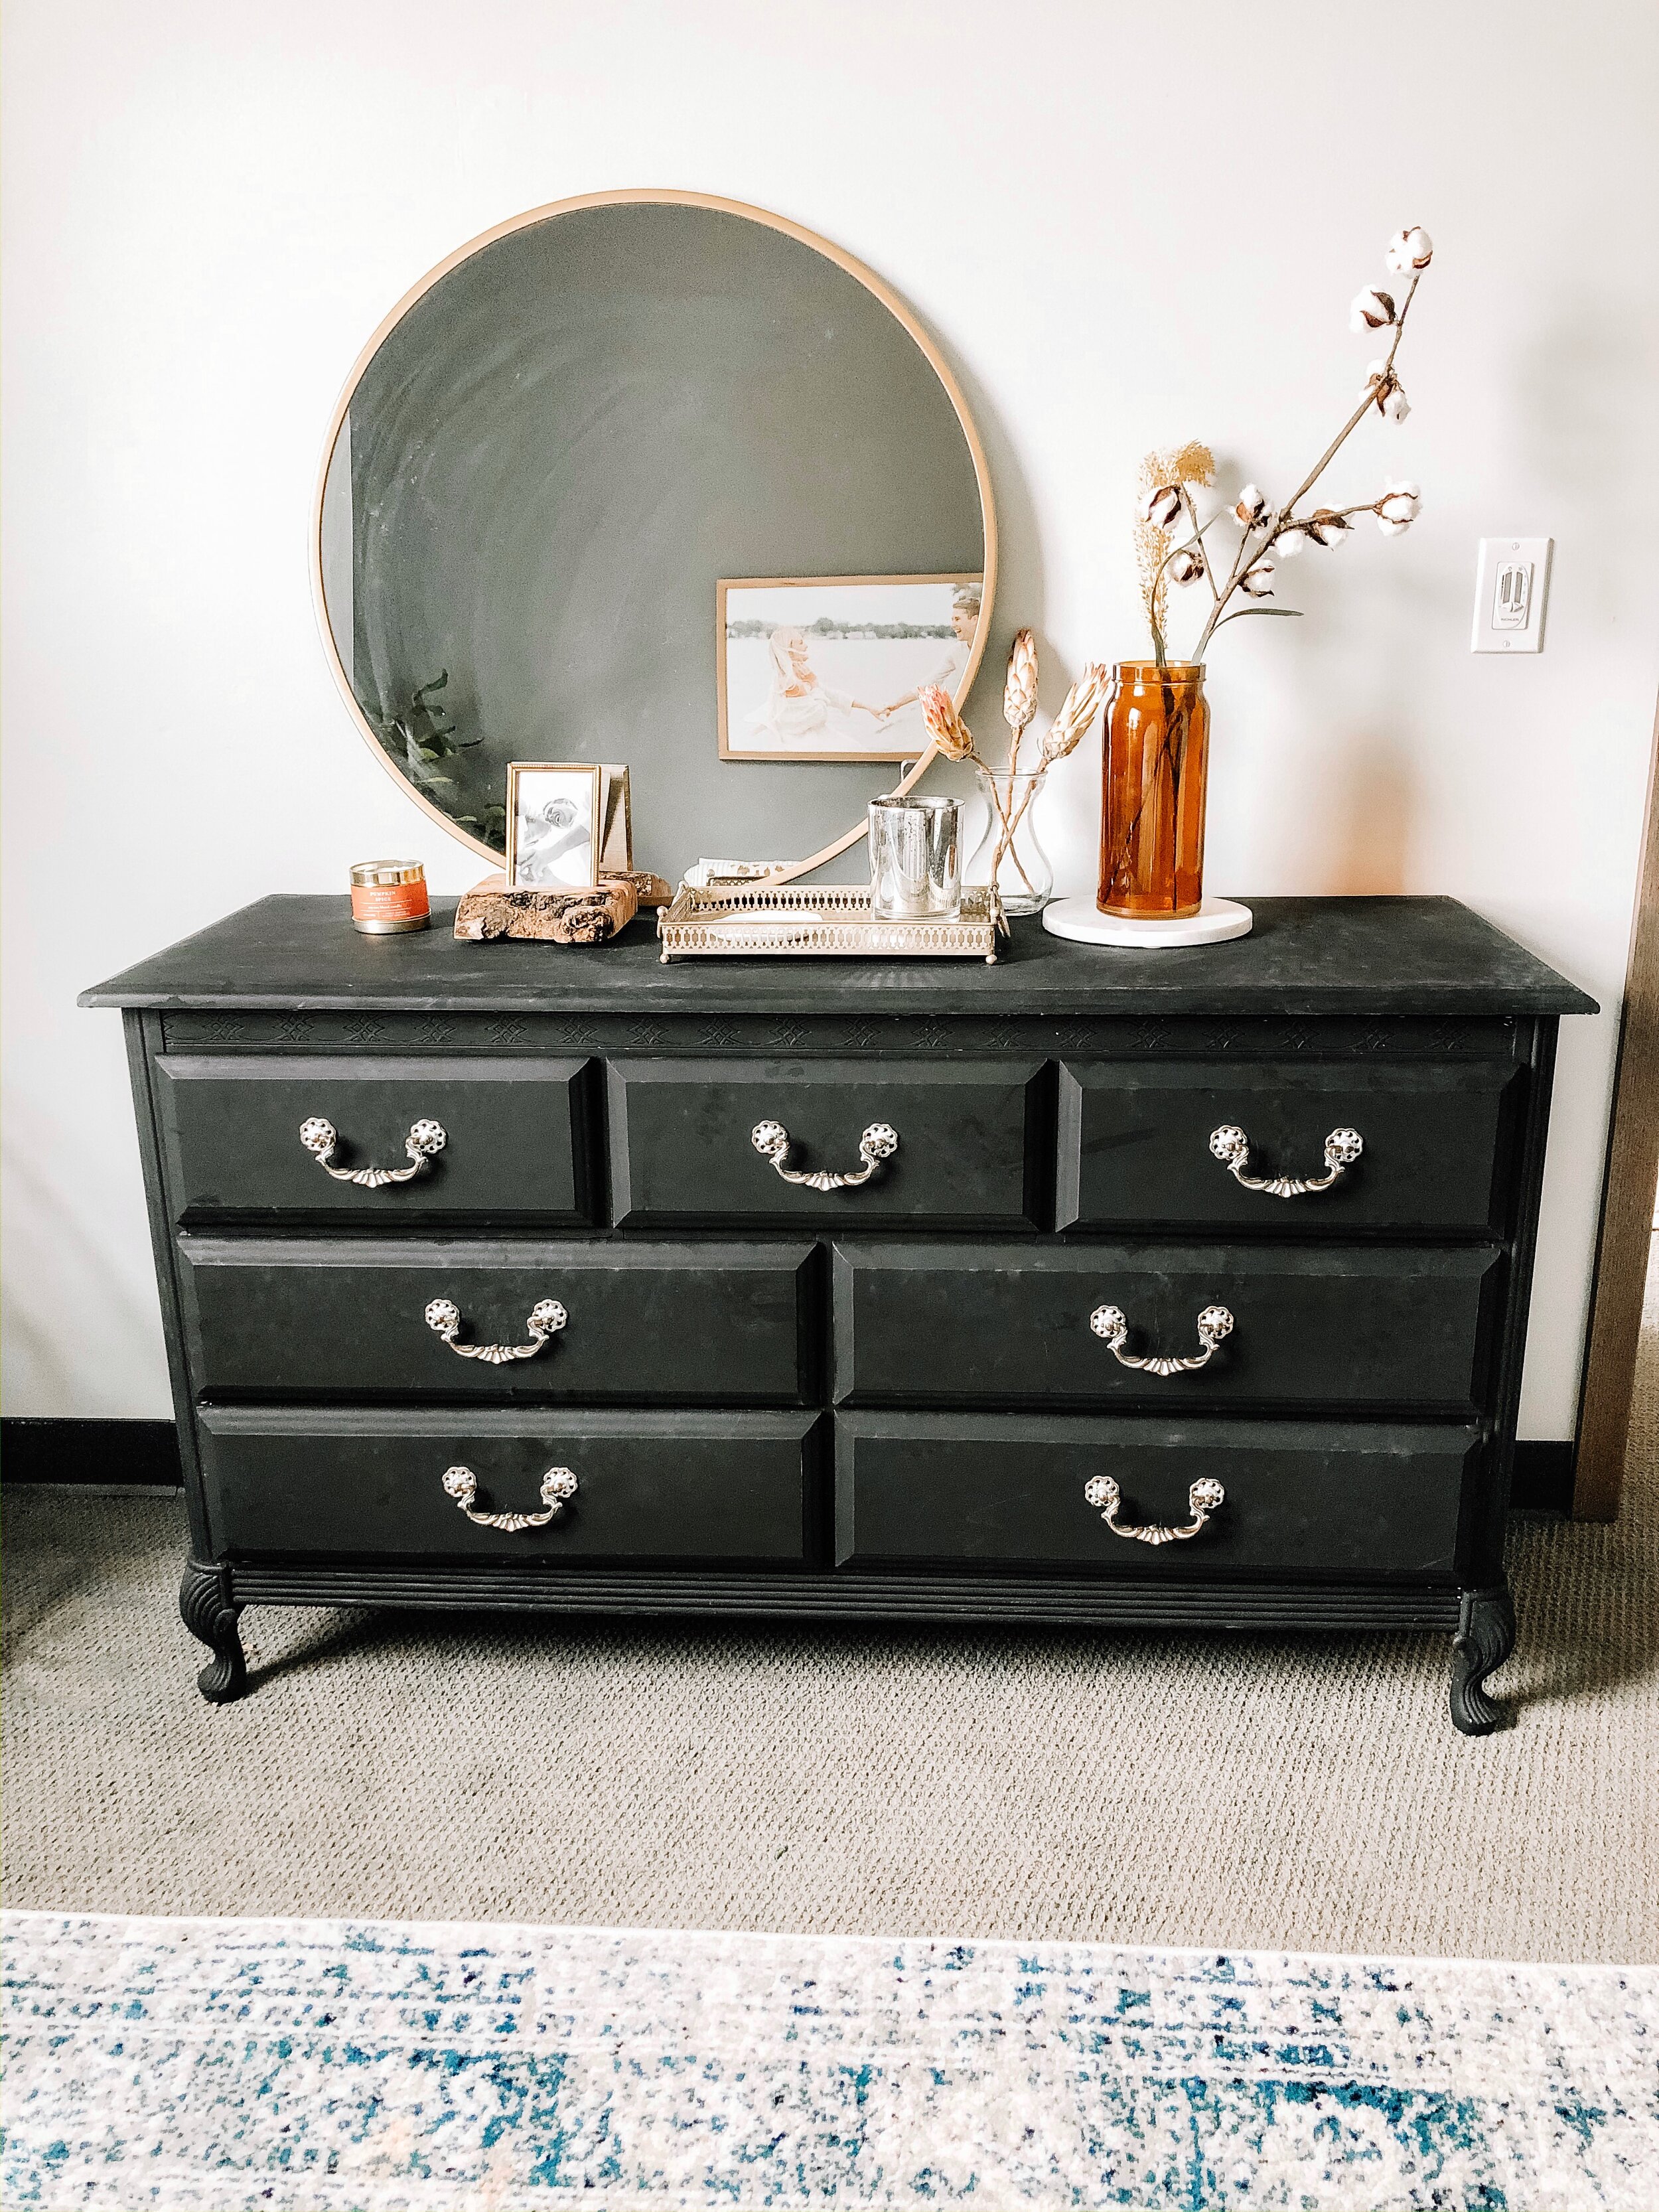 How To Style A Dresser Delaney Lane, Dresser Top Decorating Ideas